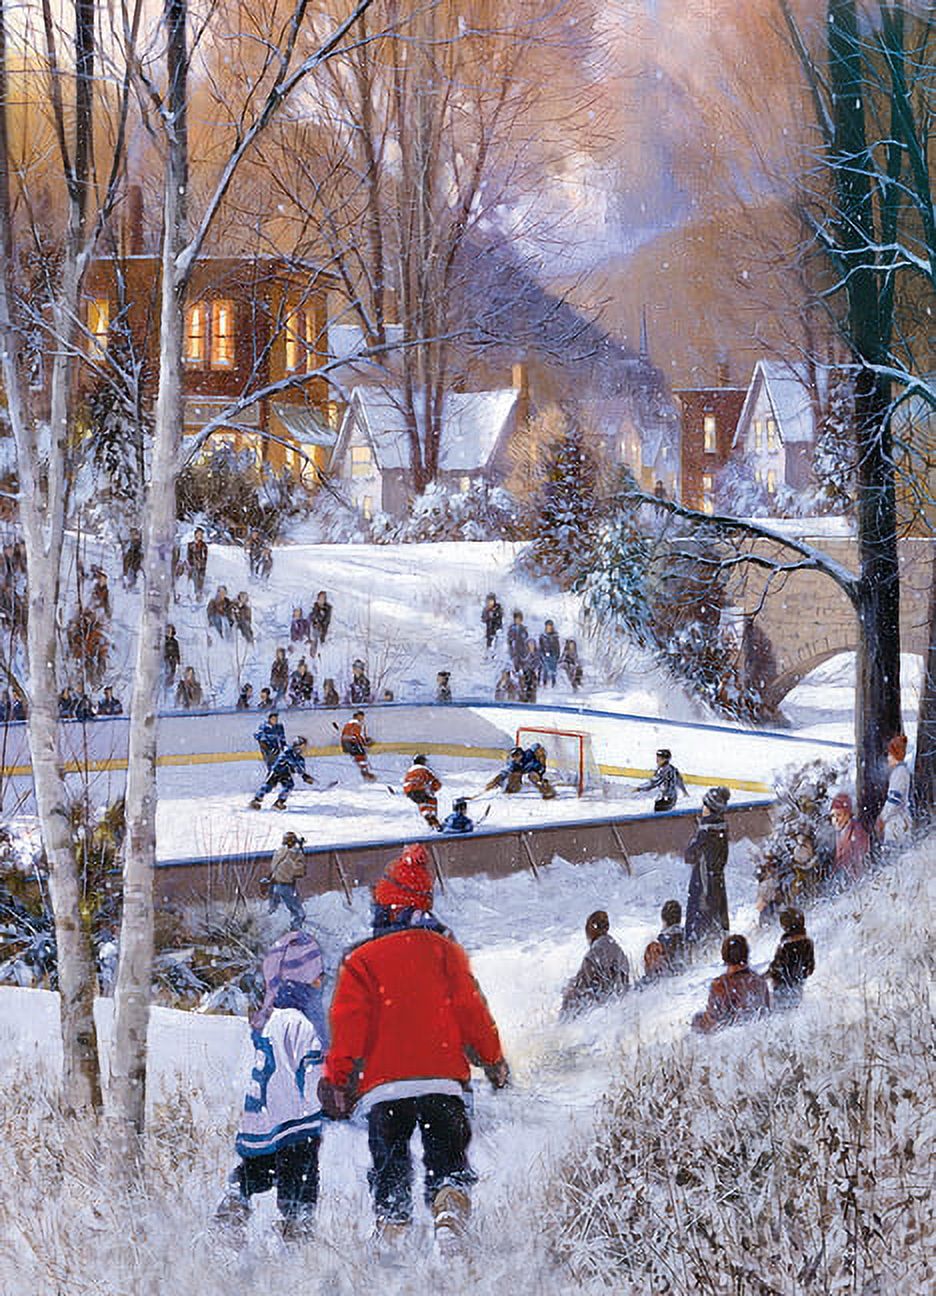 Hockey Season by Douglas R. Laird (Other) - image 1 of 4